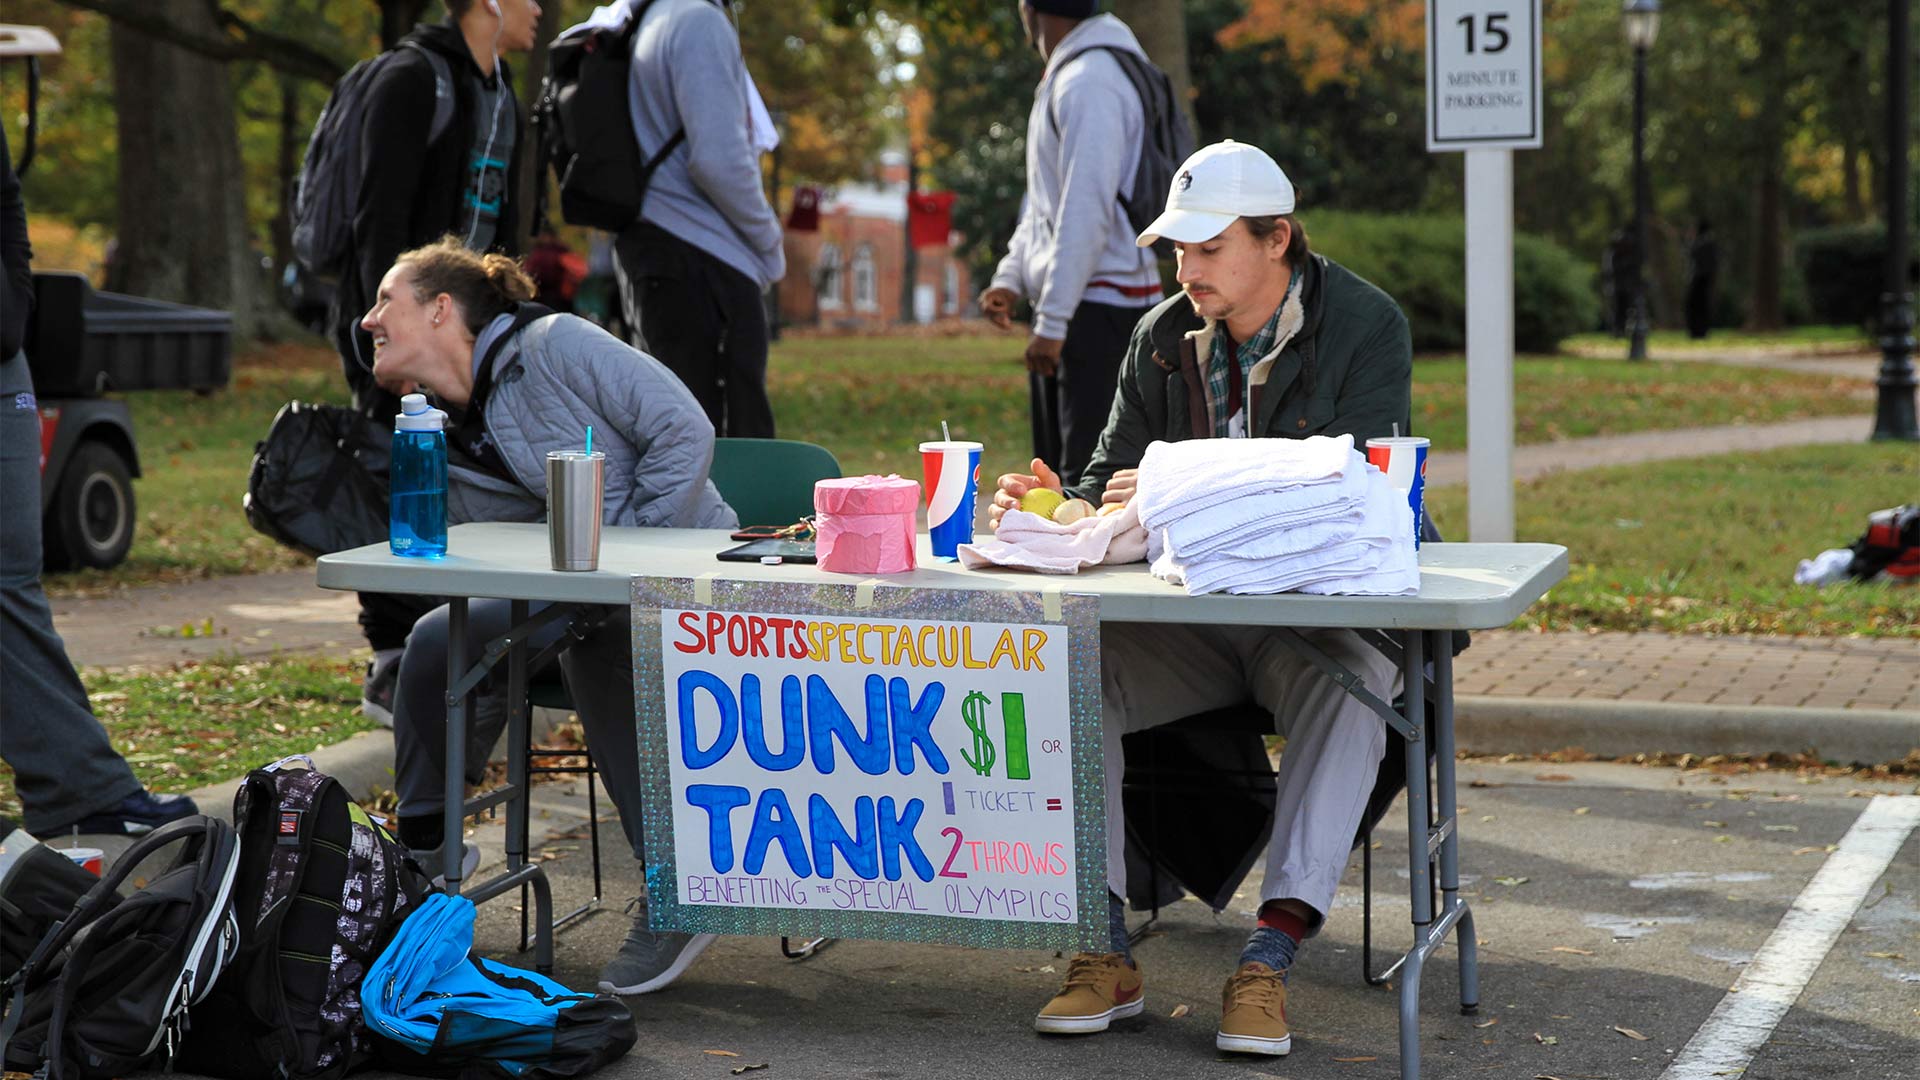 Students take donations for the dunk tank at the fall Sports Spectacular event.